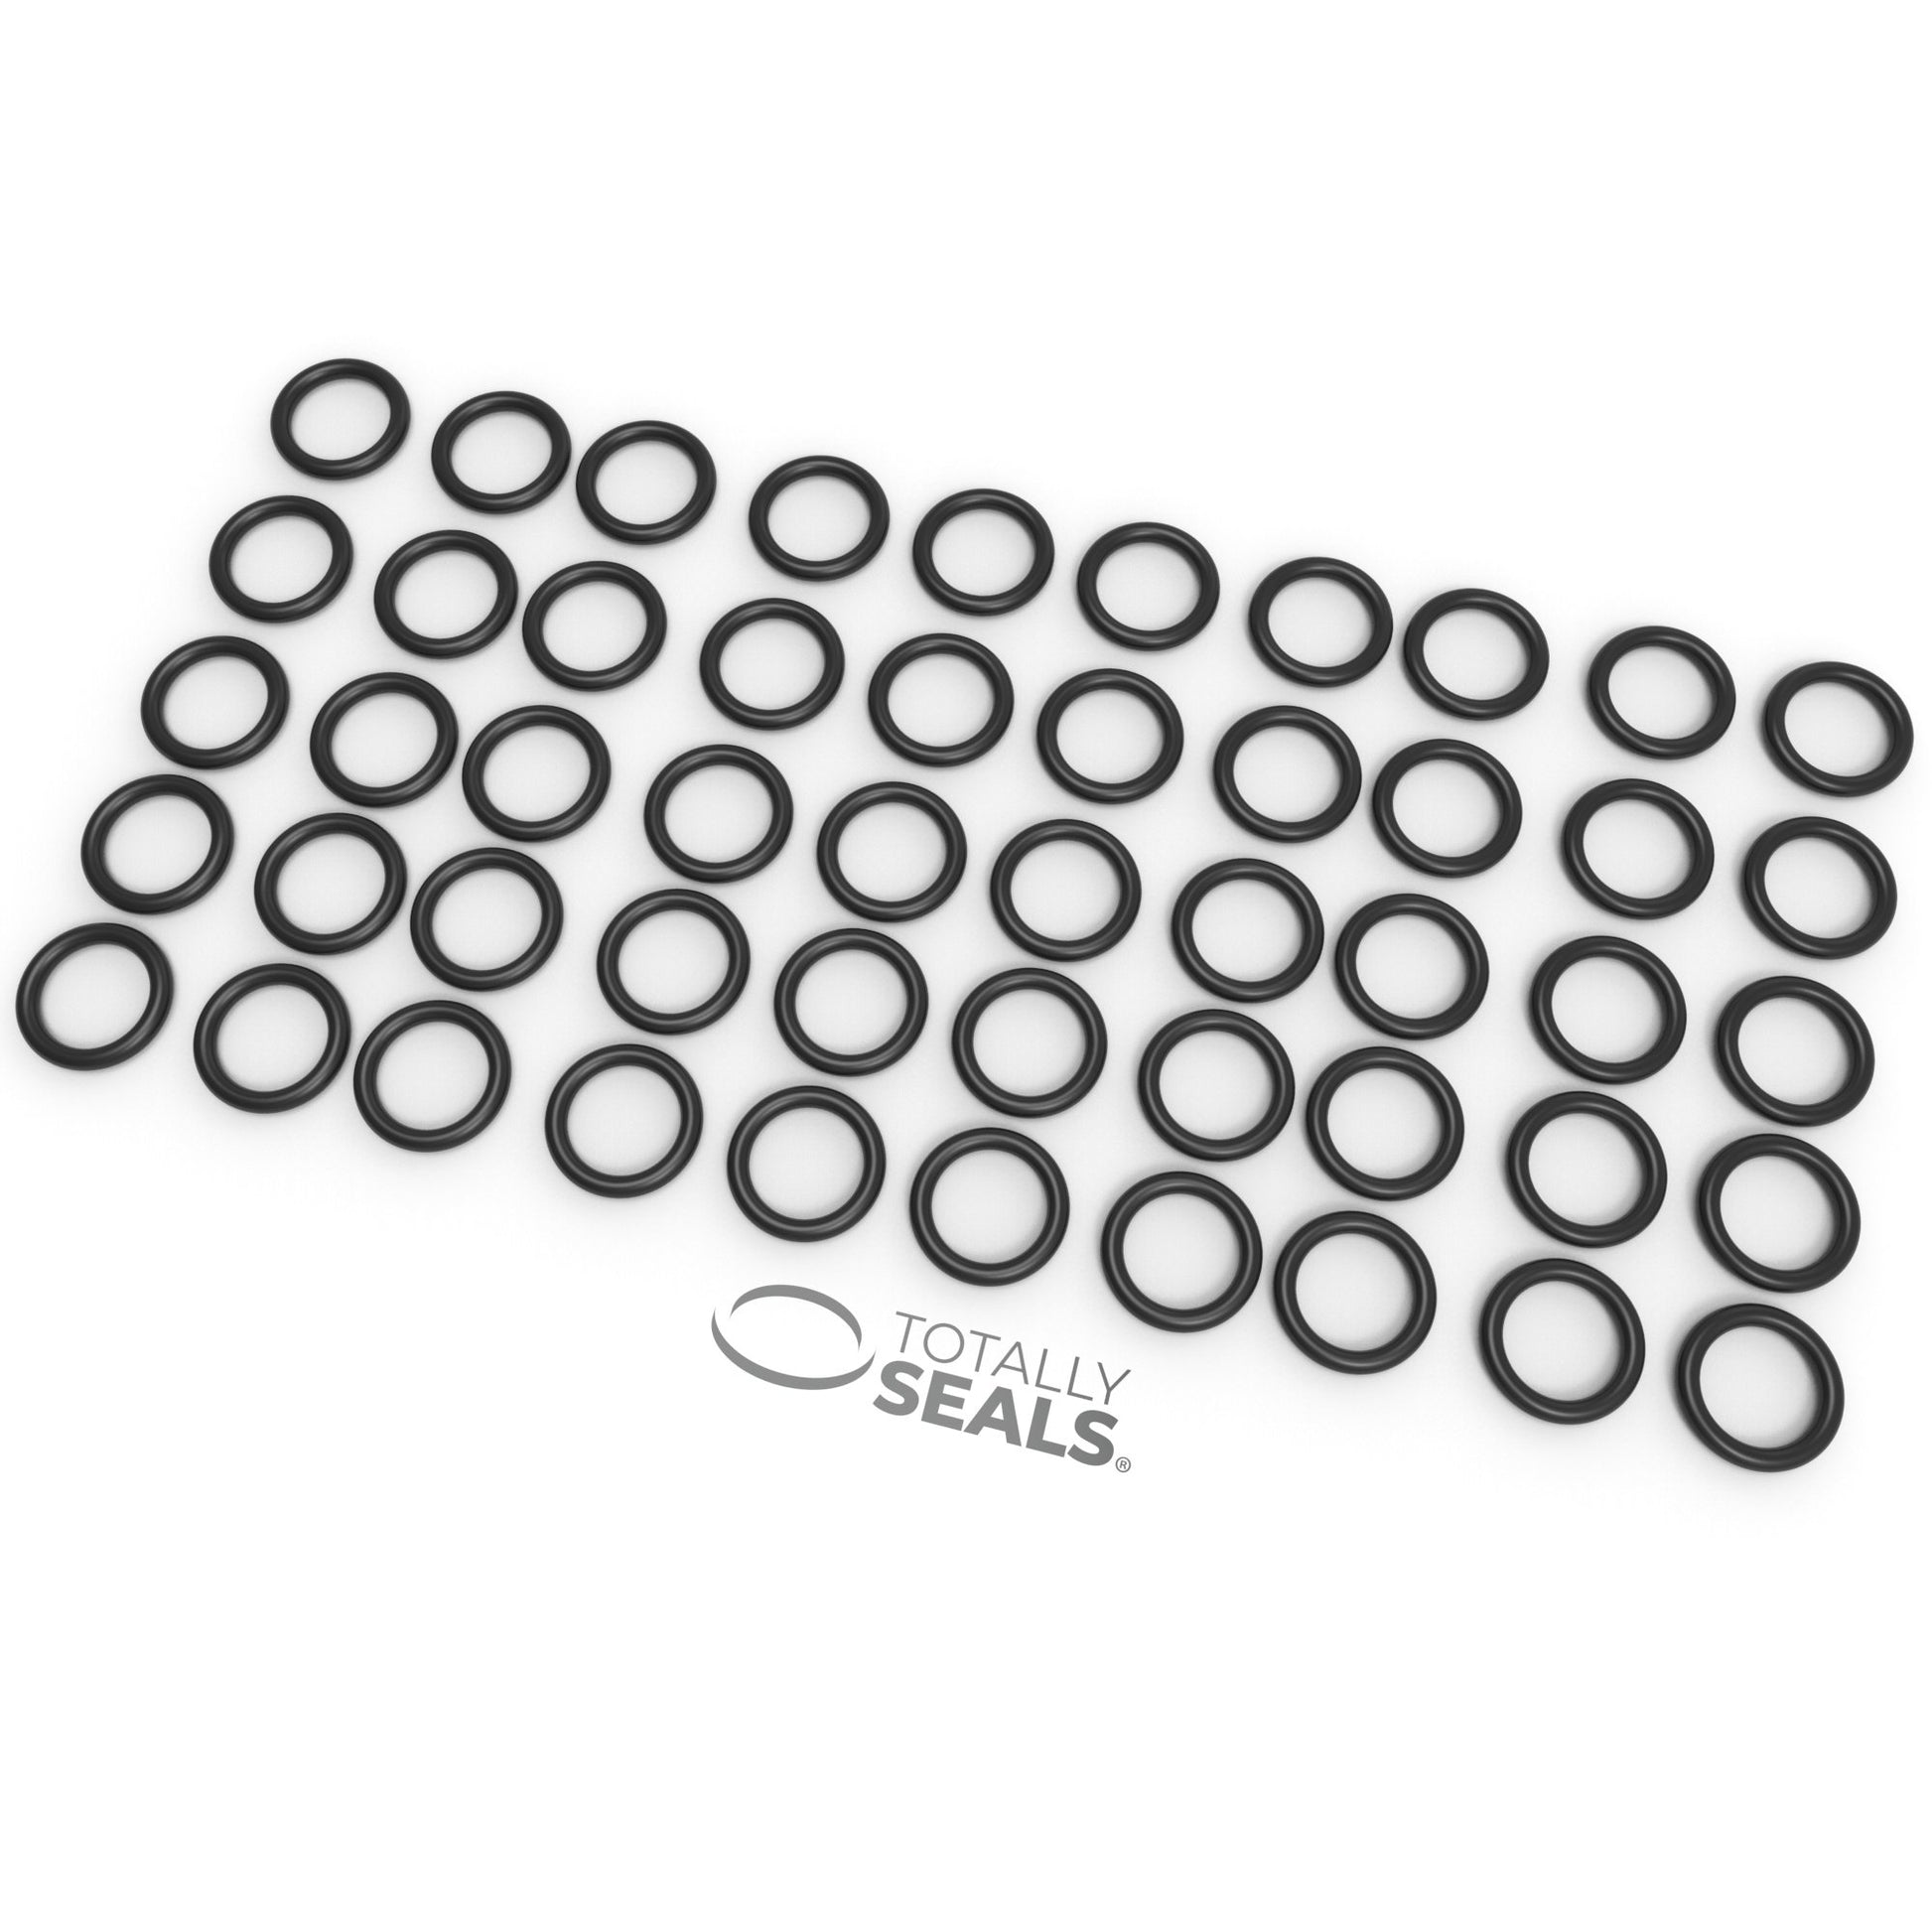 39mm x 4mm (47mm OD) Nitrile O-Rings - Totally Seals®